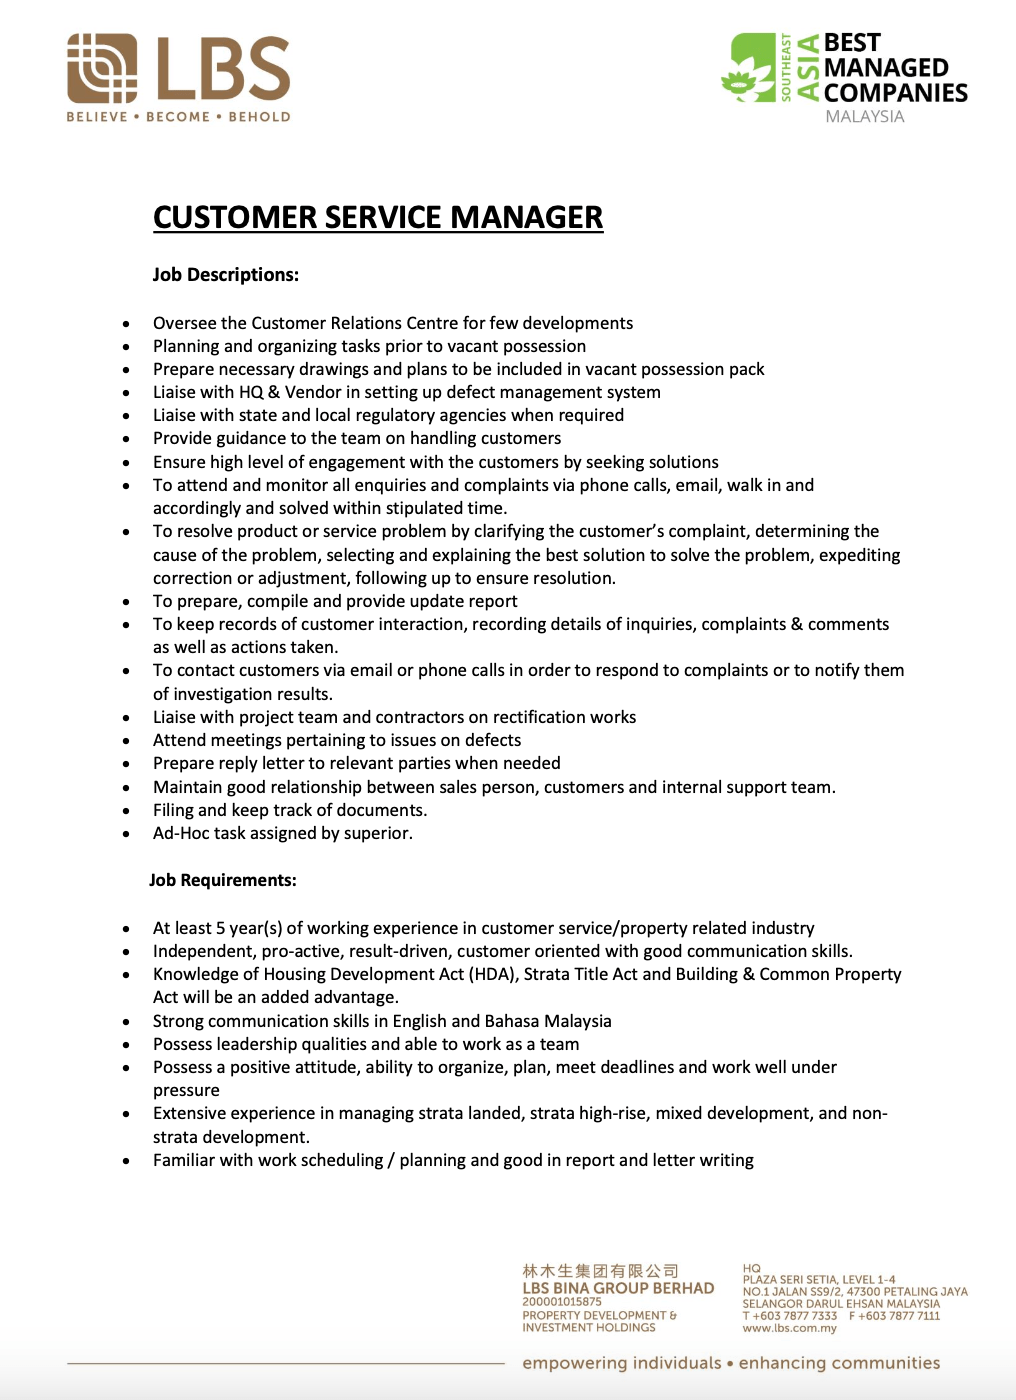 Customer Relations Manager 